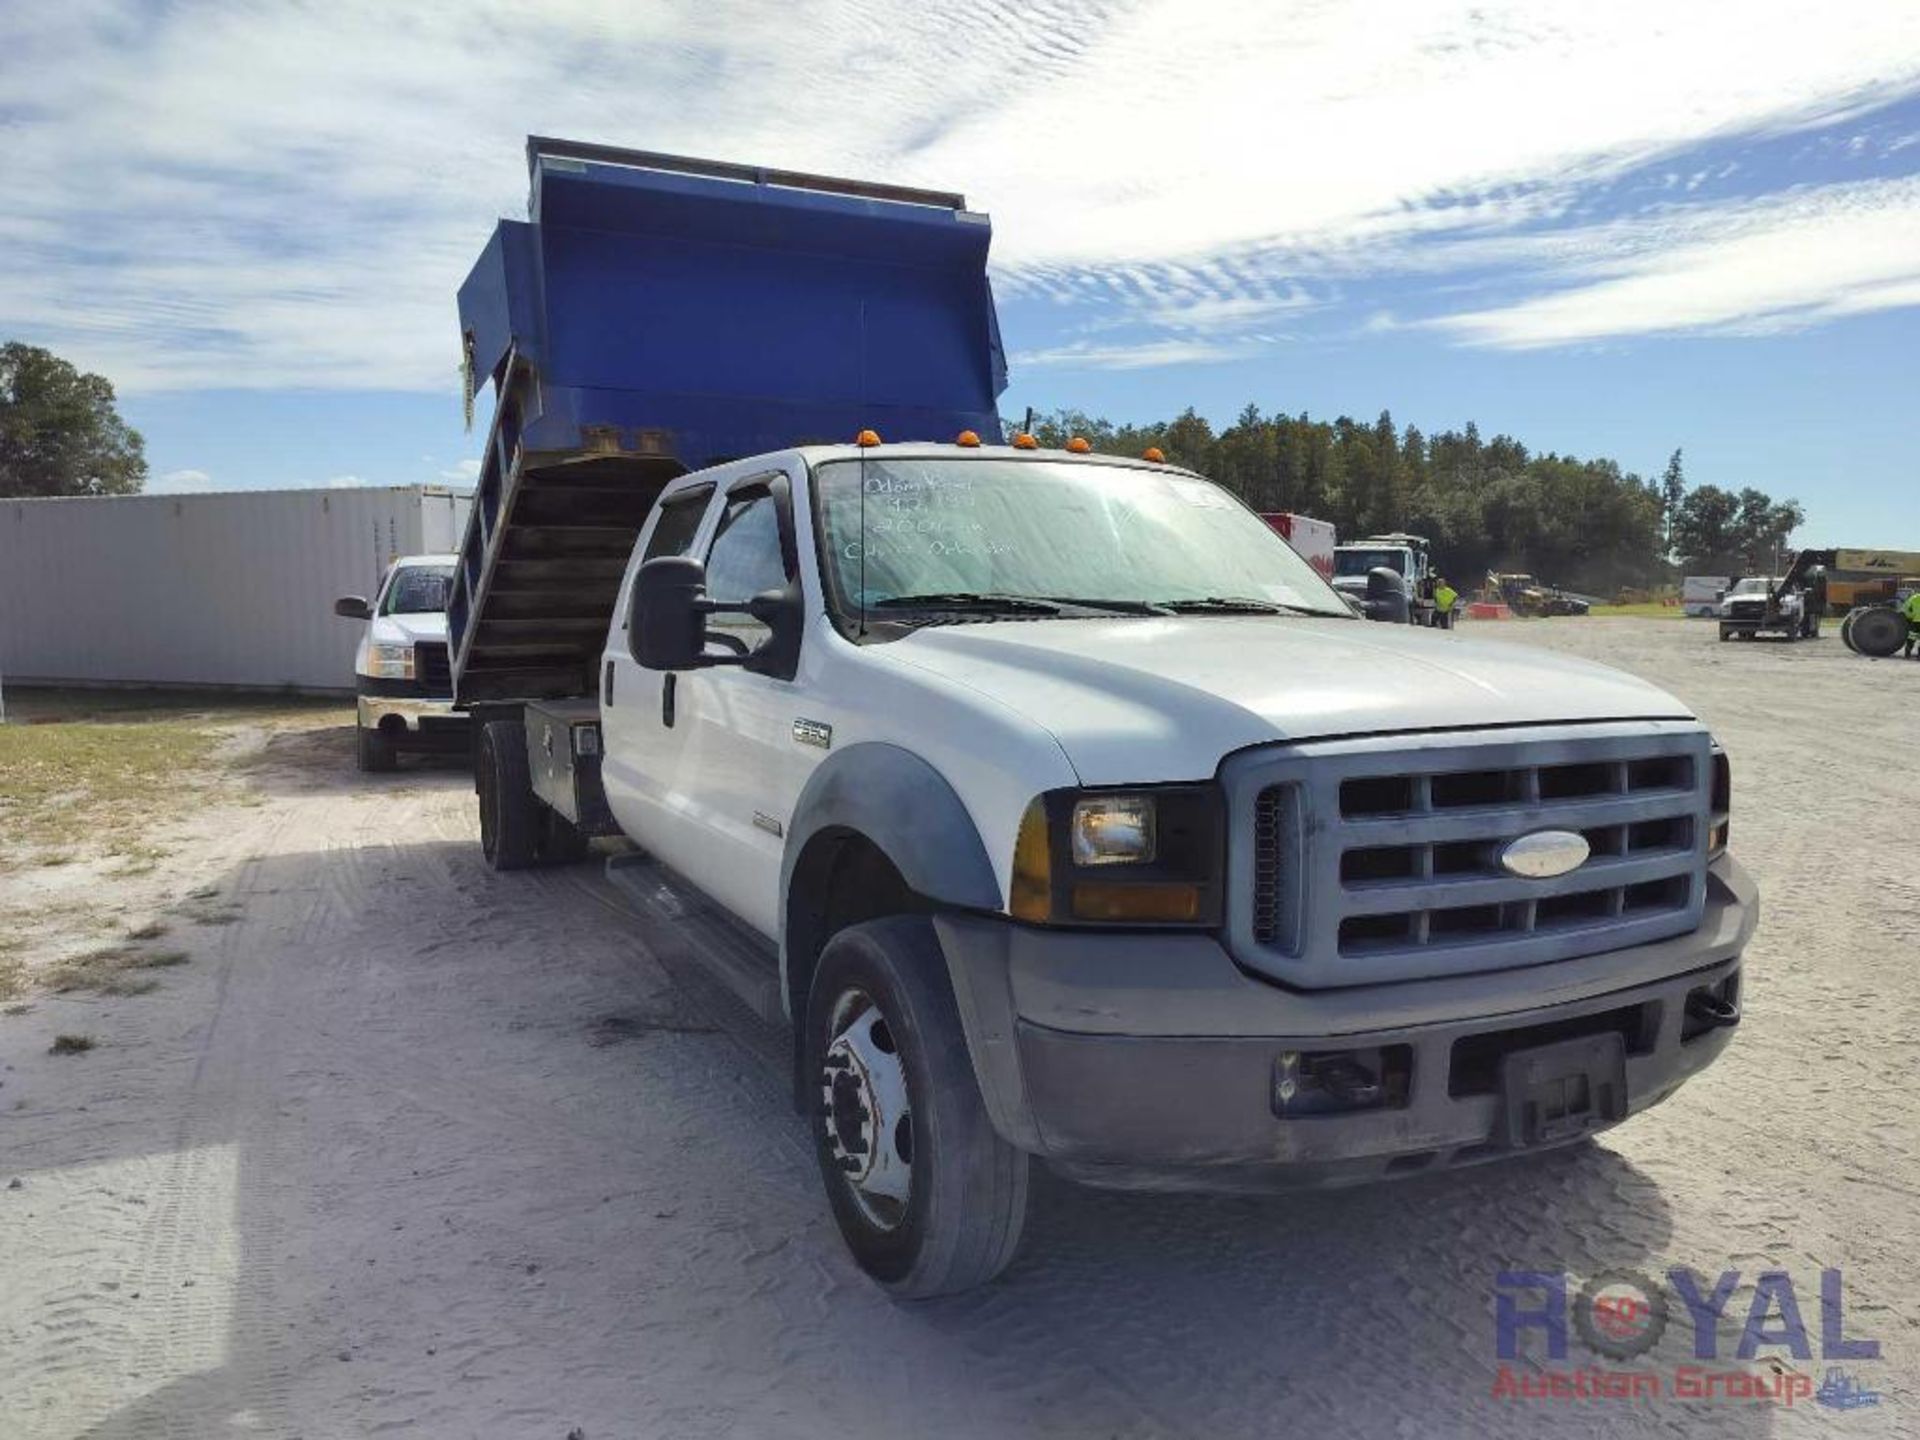 2006 Ford F350 Dump Truck - Image 2 of 27